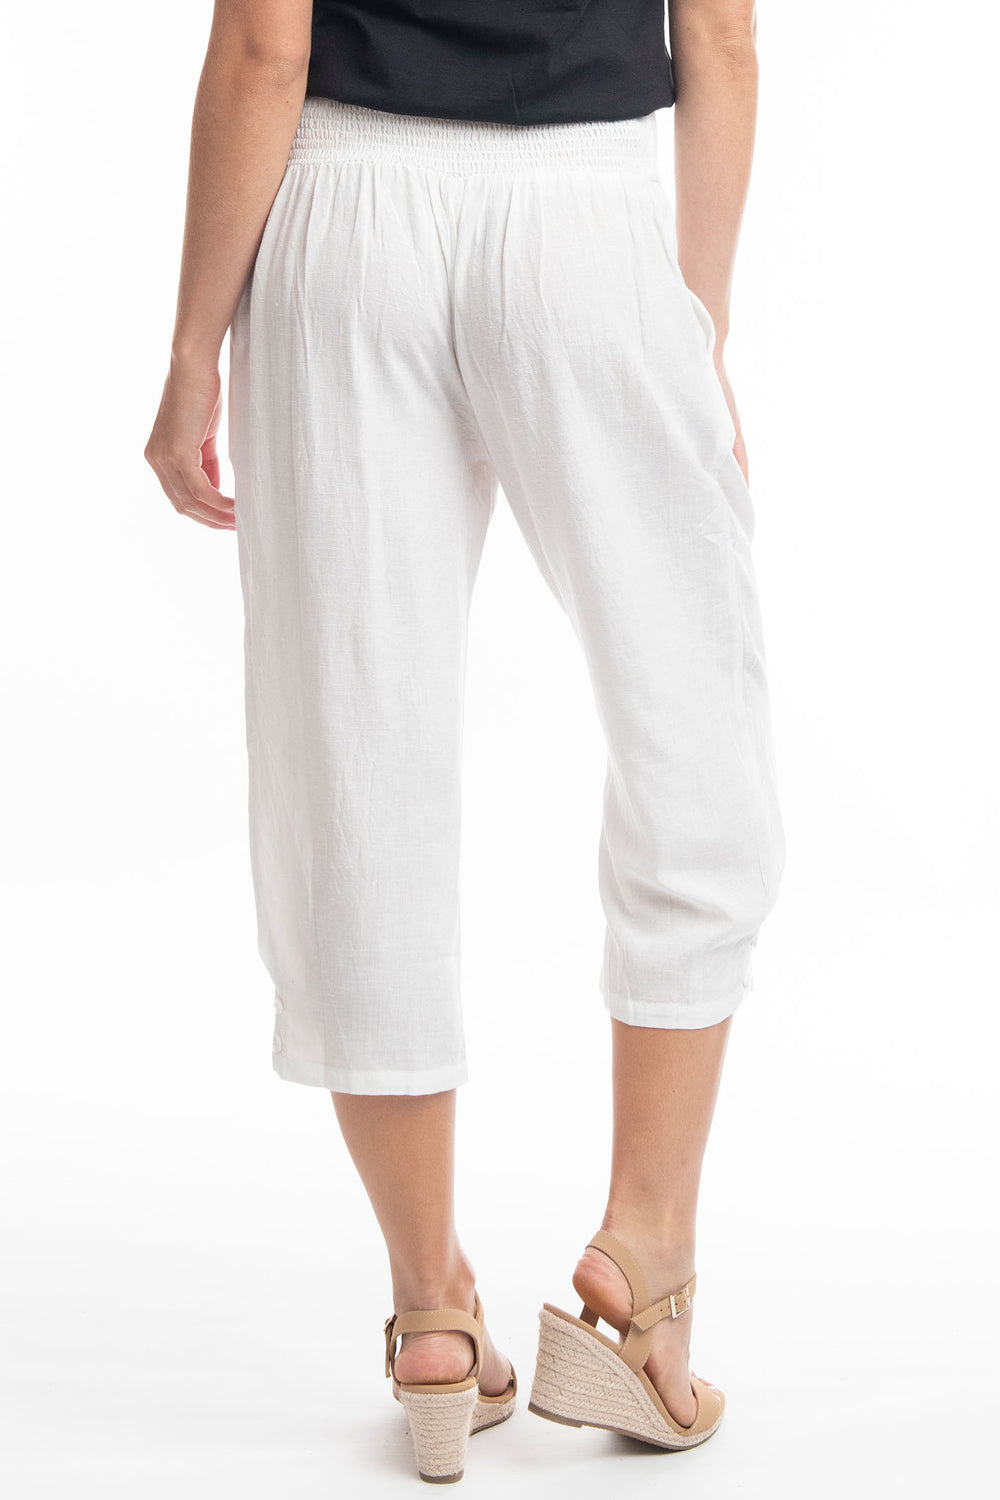 Orientique O6688 White Cropped Linen Trousers - Experience Boutique